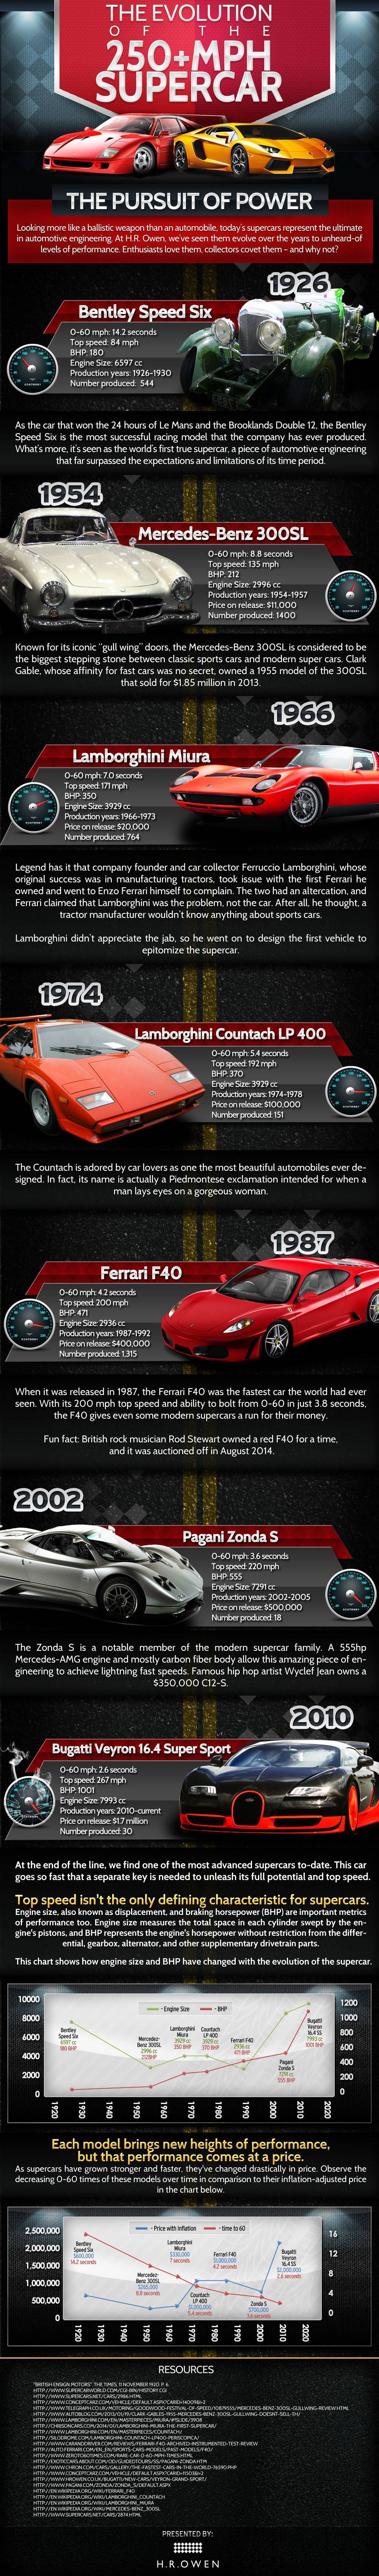 Evolution of the 200mph Supercar infographic